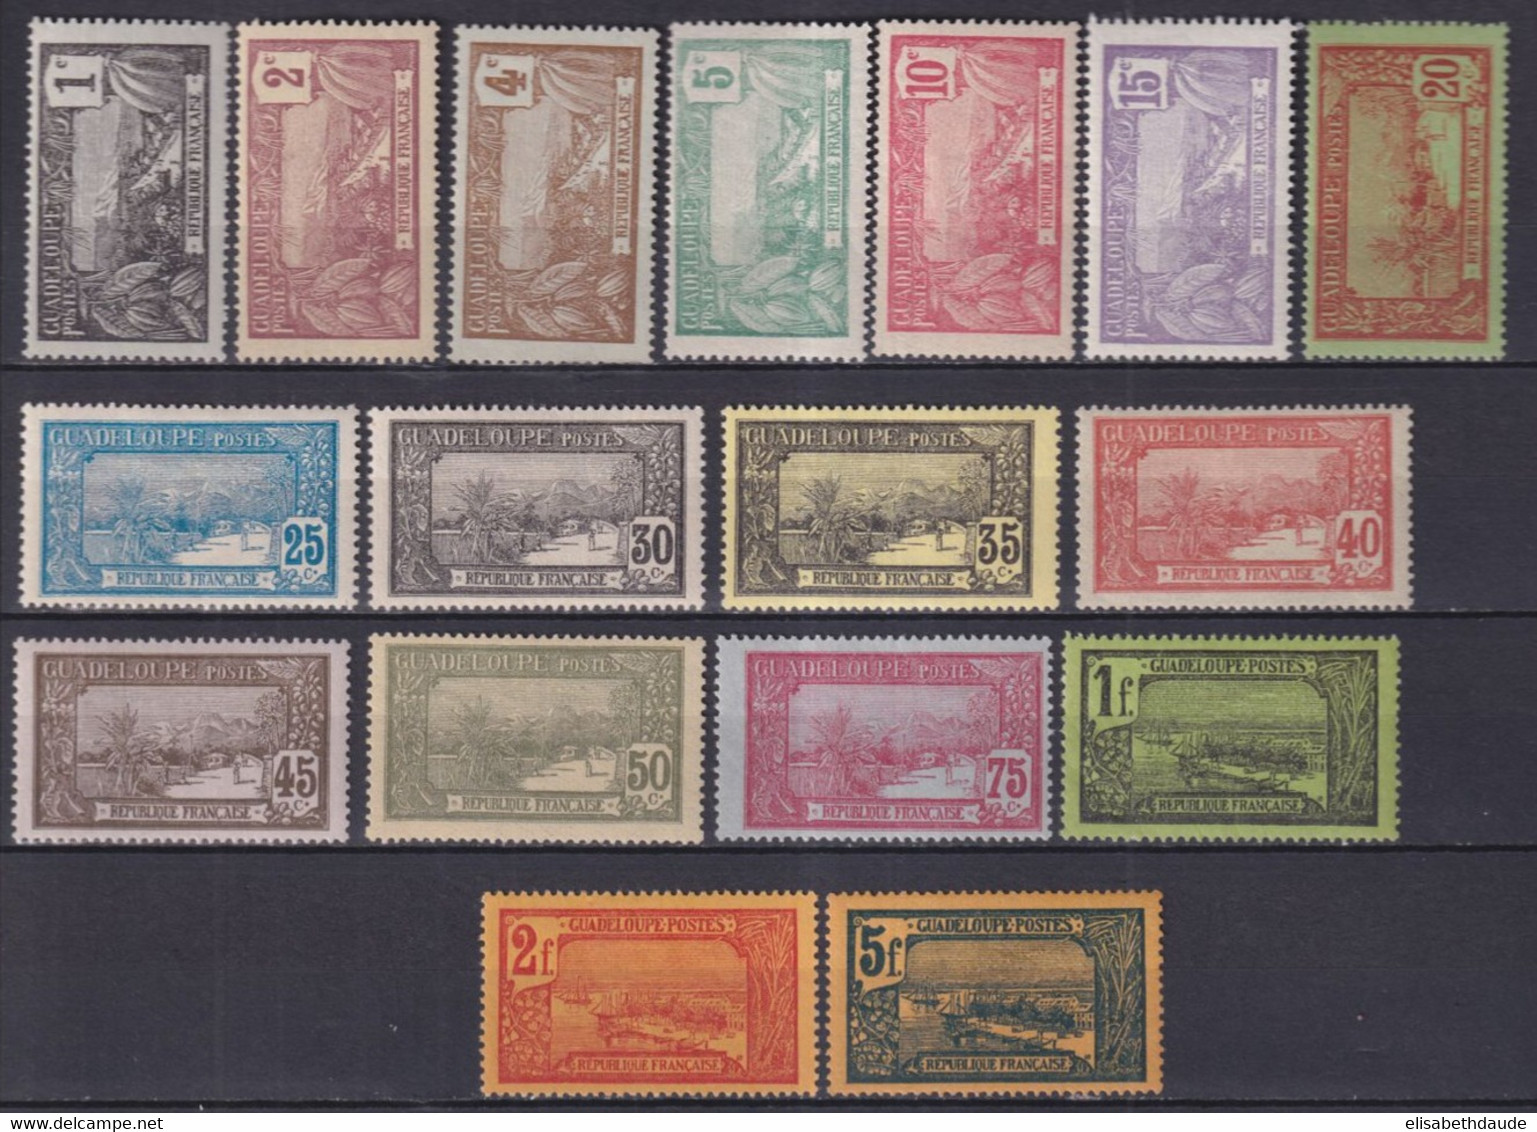 GUADELOUPE - 1905 - YVERT N°55/71 * MH - COTE = 41.5 EUR. - - Ungebraucht